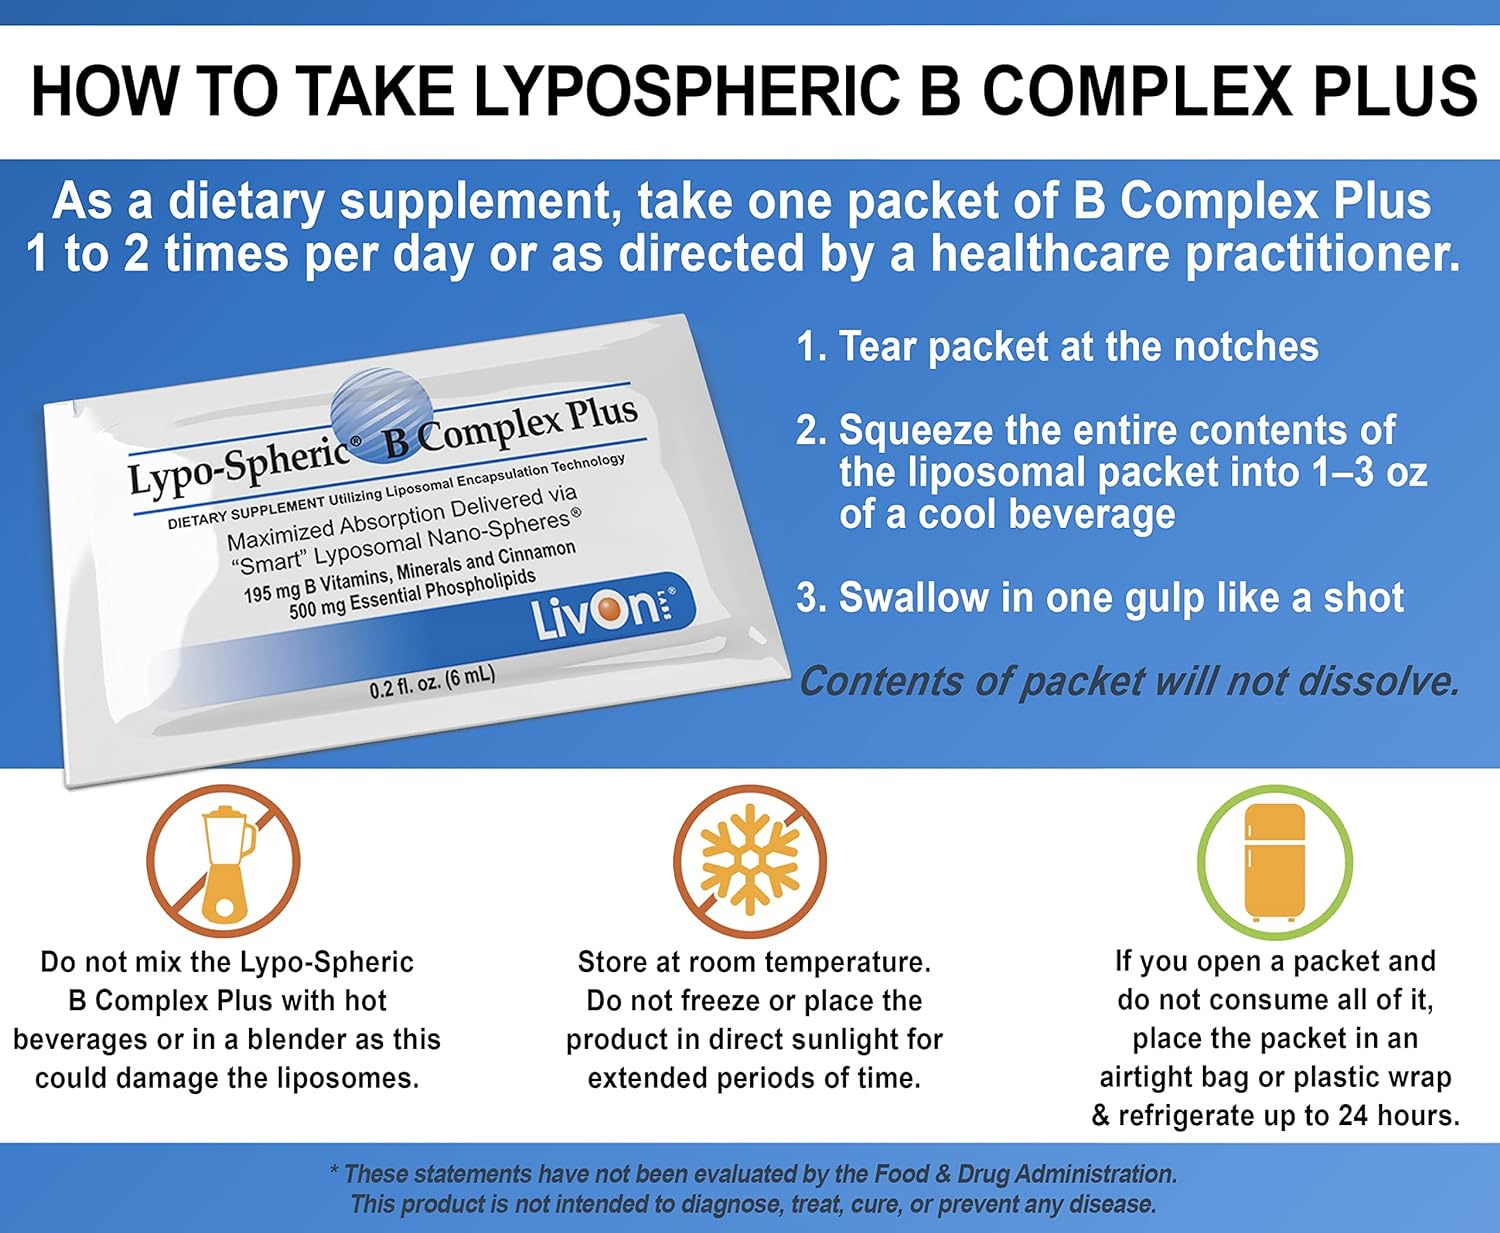 Lypo–Spheric B Complex Plus – 30 Packets – 195 mg B Vitamins, Minerals  Cinnamon Per Packet – Liposome Encapsulated for Improved Absorption – 100% Non–GMO